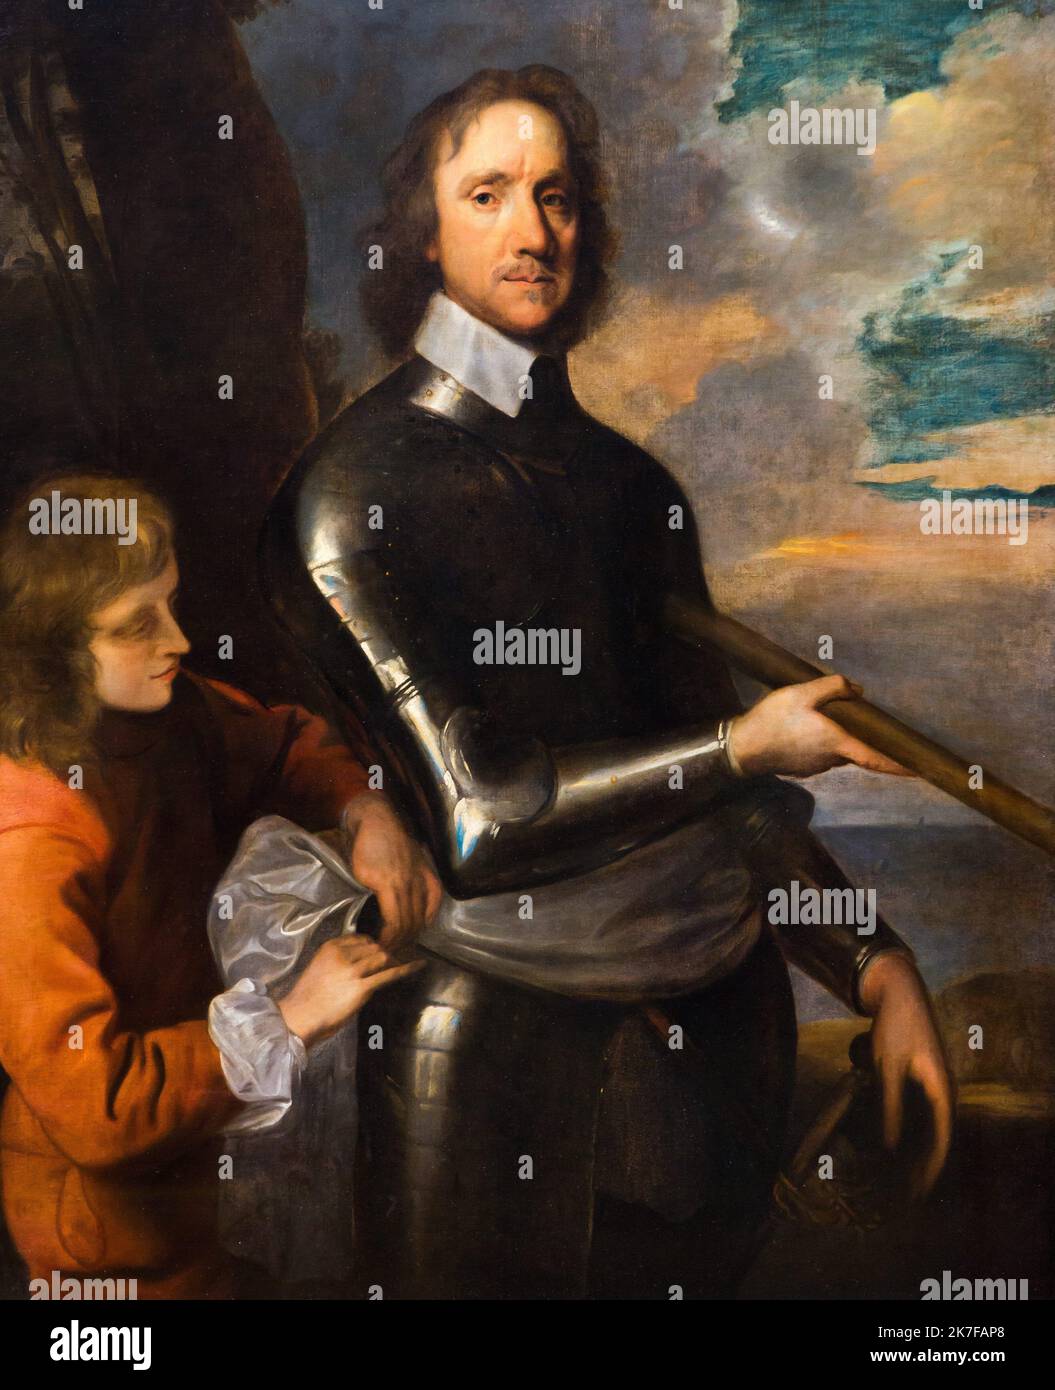 ©Active Museu/MAXPPP - ActiveMuseum 0003741.jpg / Oliver Cromwell, 1658 - Robert Walker Huile sur toile 1658 - / Robert Walker / Peinture Active Museum / Le Pictorium 2 people ,Armor ,Army ,austere ,Belt ,Black armor ,Bourgeois ,Brown hair ,Cloud ,Collar ,Commanding officer ,Dark-eyed ,Dictator ,English ,Gentleman ,Grey ,Ireland ,Landscape ,Lord ,Lord of Commonwealth of England ,Man ,Military ,Nobility ,Of noble birth ,Official dress ,Outdoor ,Politic ,Portrait ,Profile ,Protestant ,Puritanism ,Ribbon ,Scotland ,Soldier ,Stick ,Stiff ,Vertical ,White ,Oliver Cromwell ,17th century ,Robert Wal Stock Photo